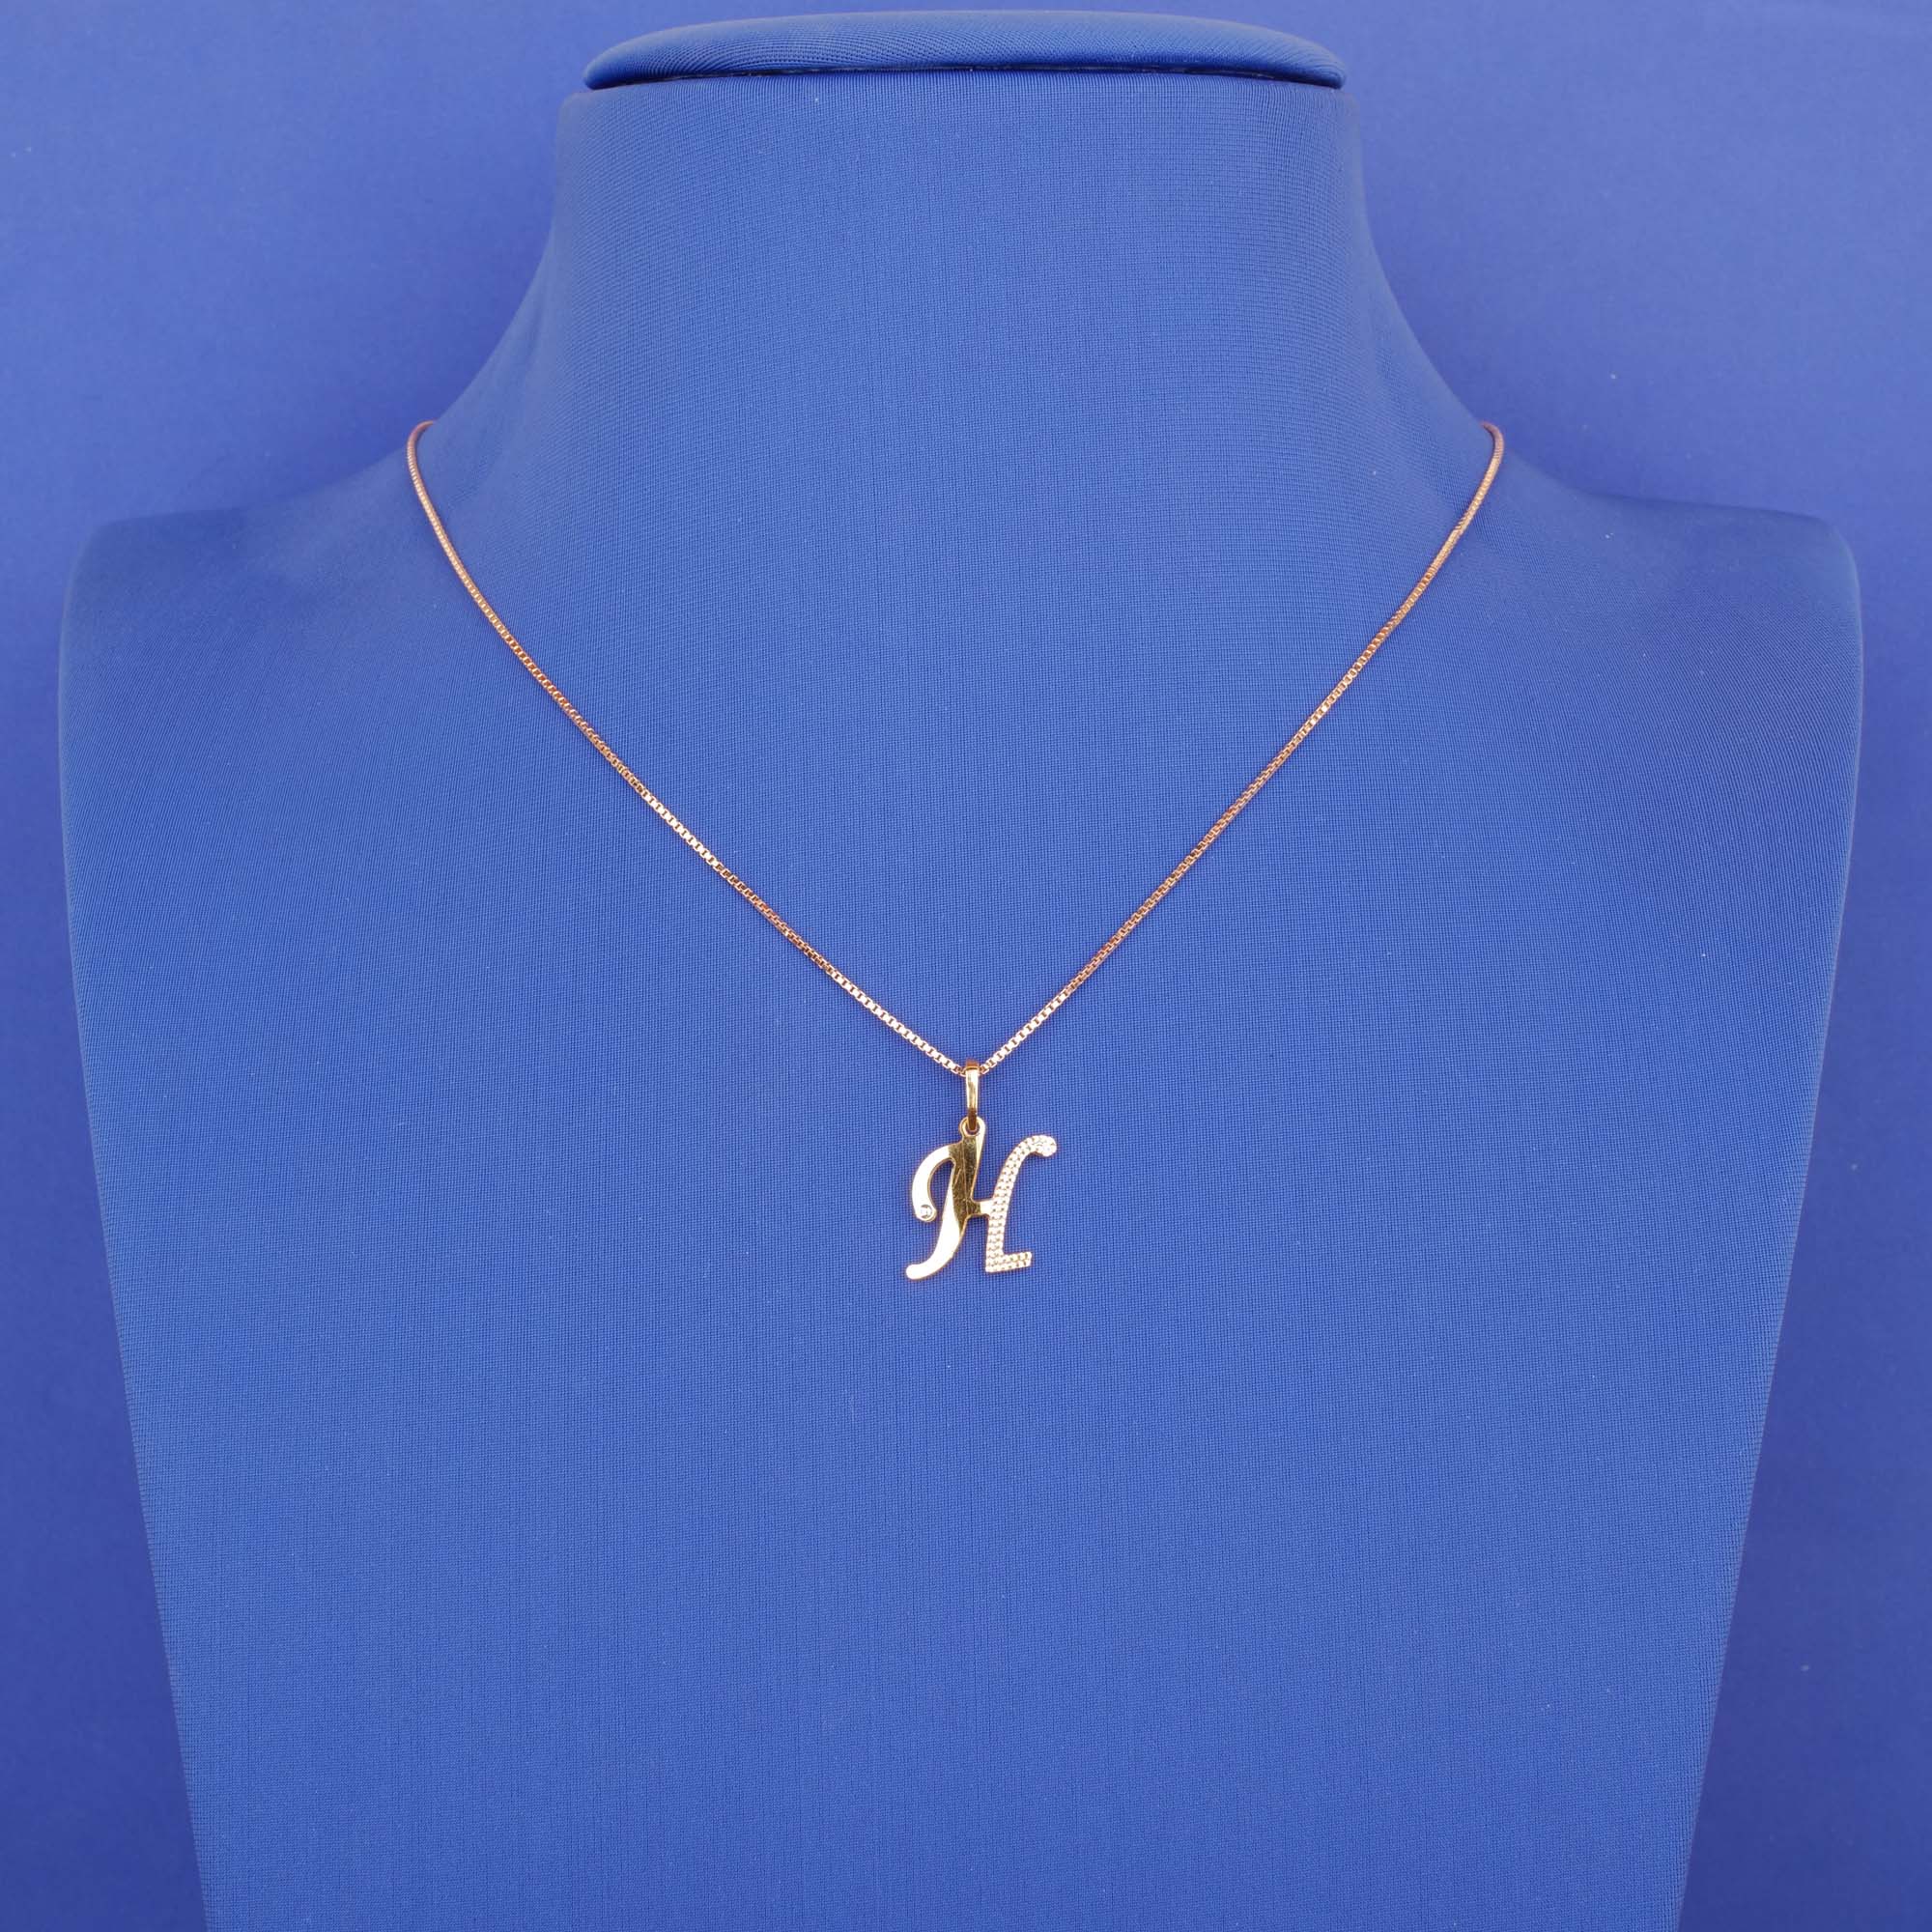 22K 'H' Tri-Color Pendant (chain not included)